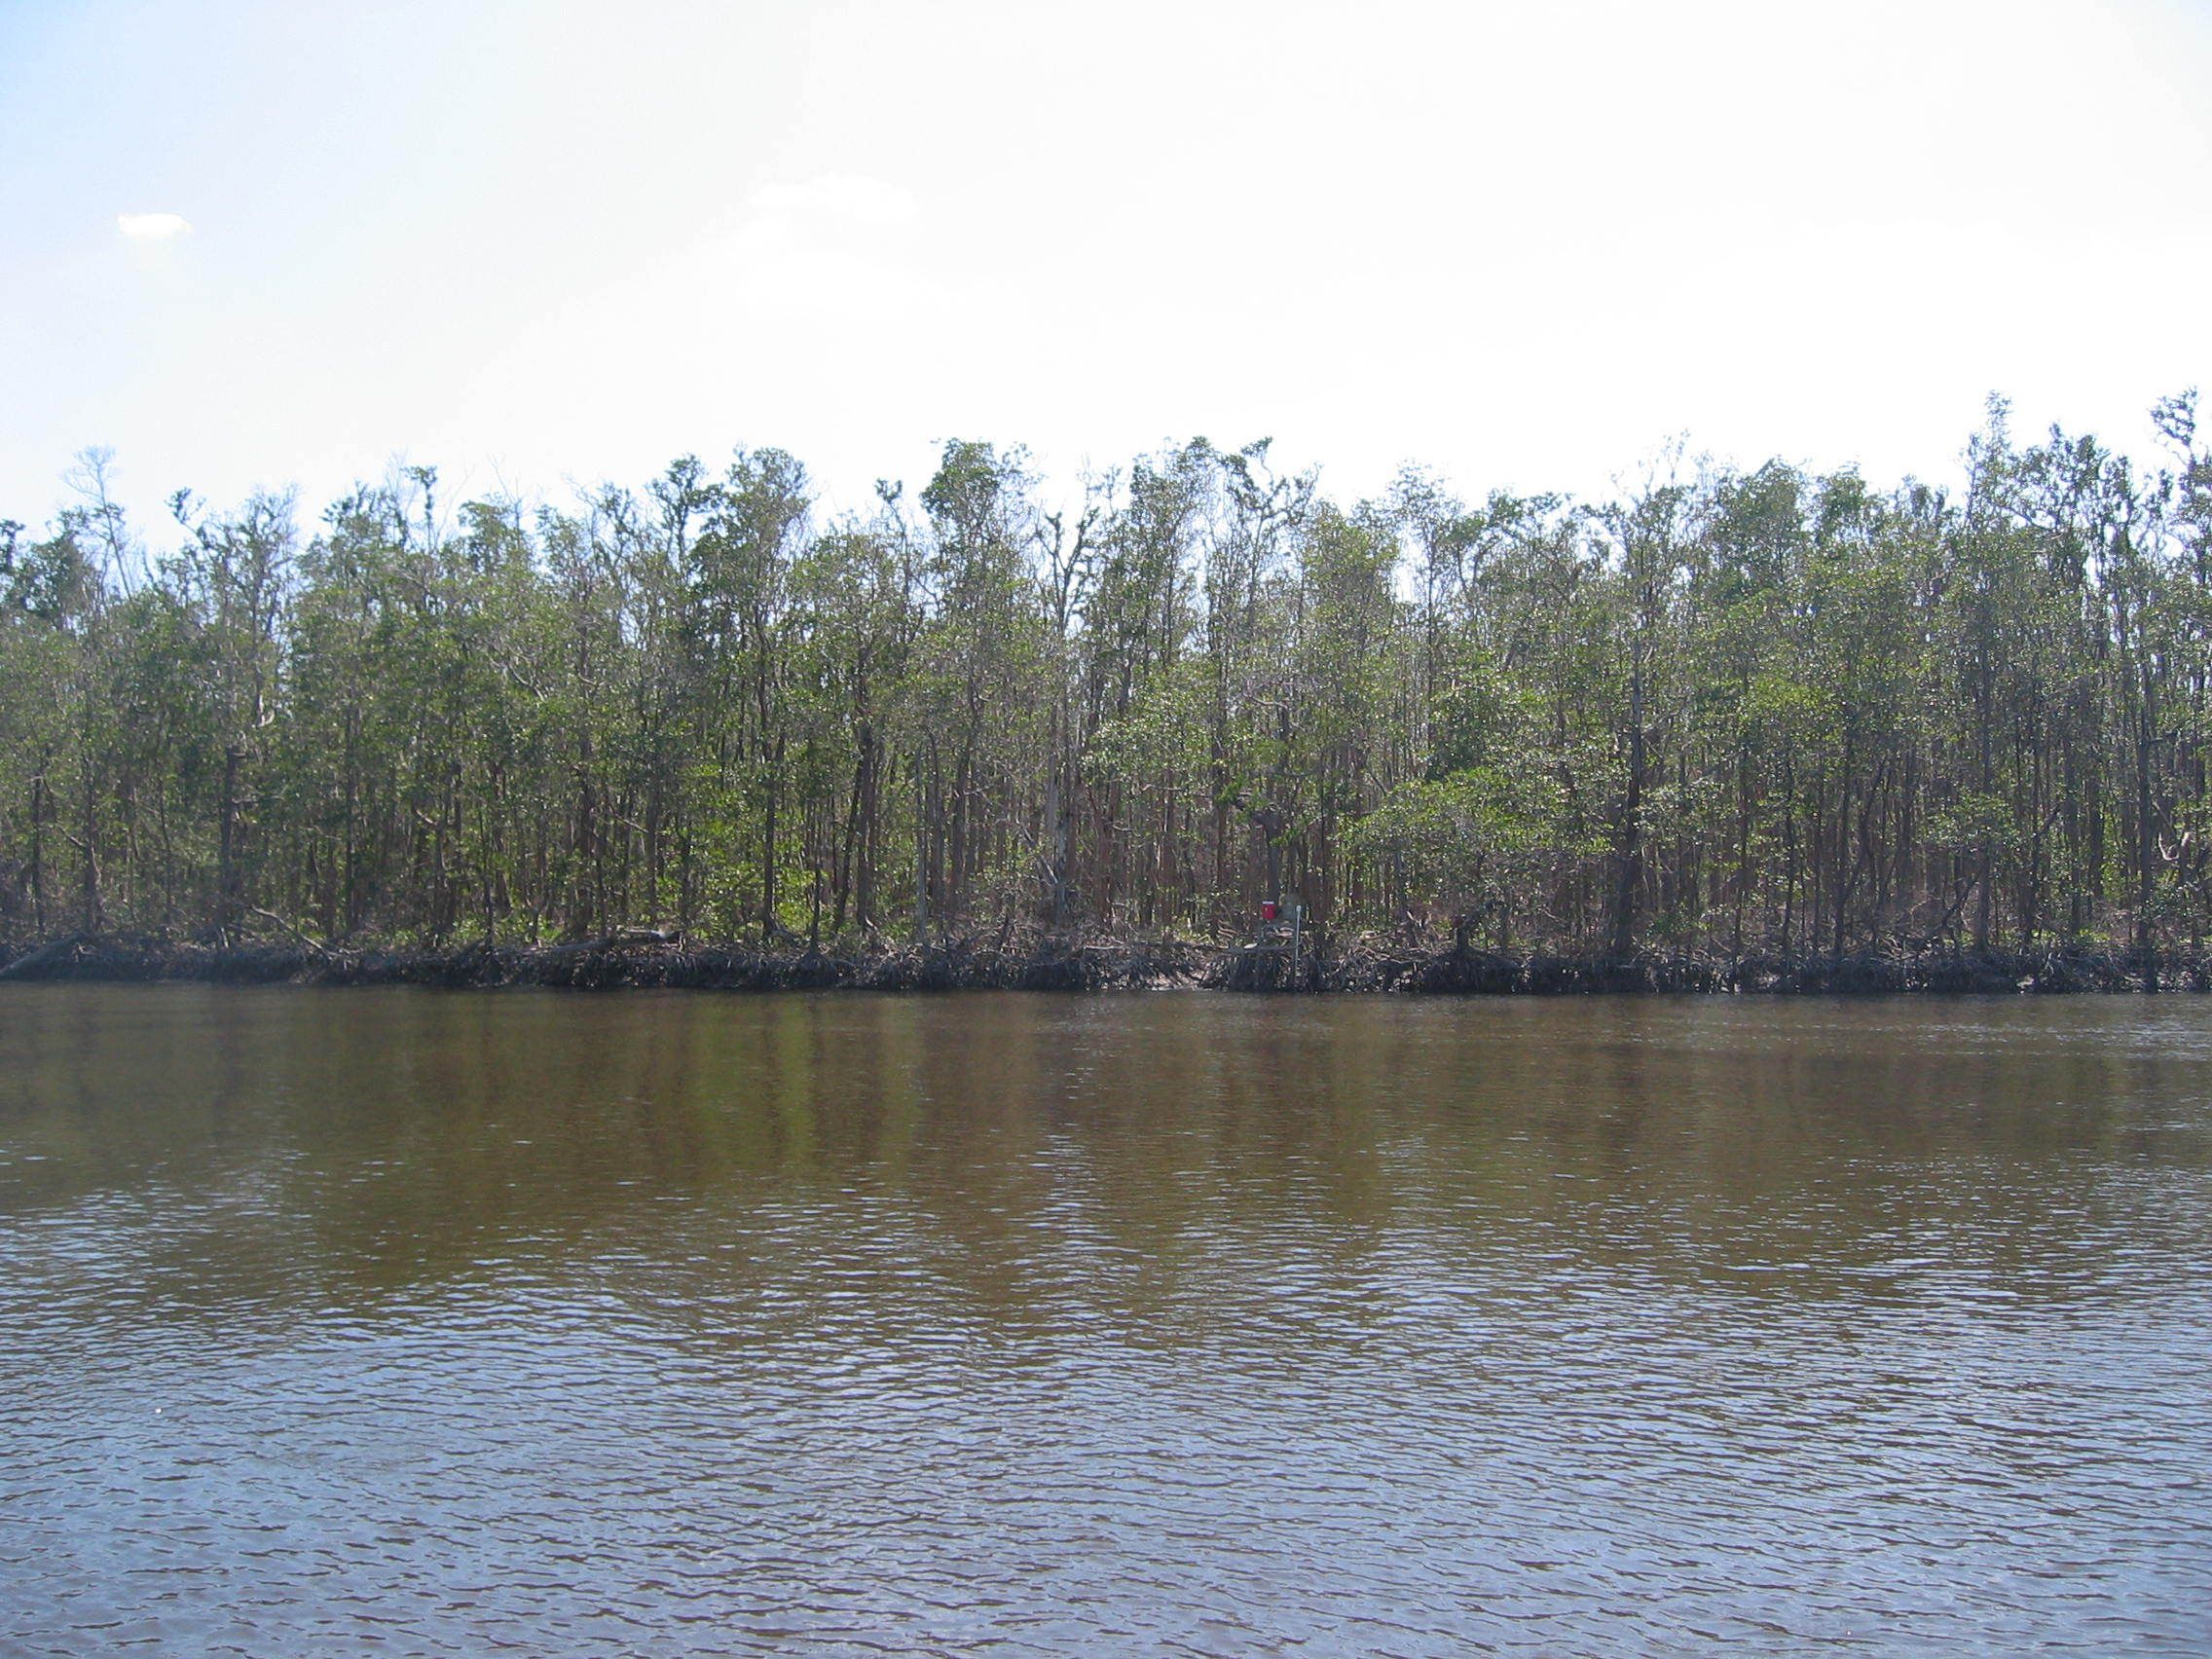 Fringe mangrove forest at SRS-6 in Shark River showing defoliation by Hurricane Wilma